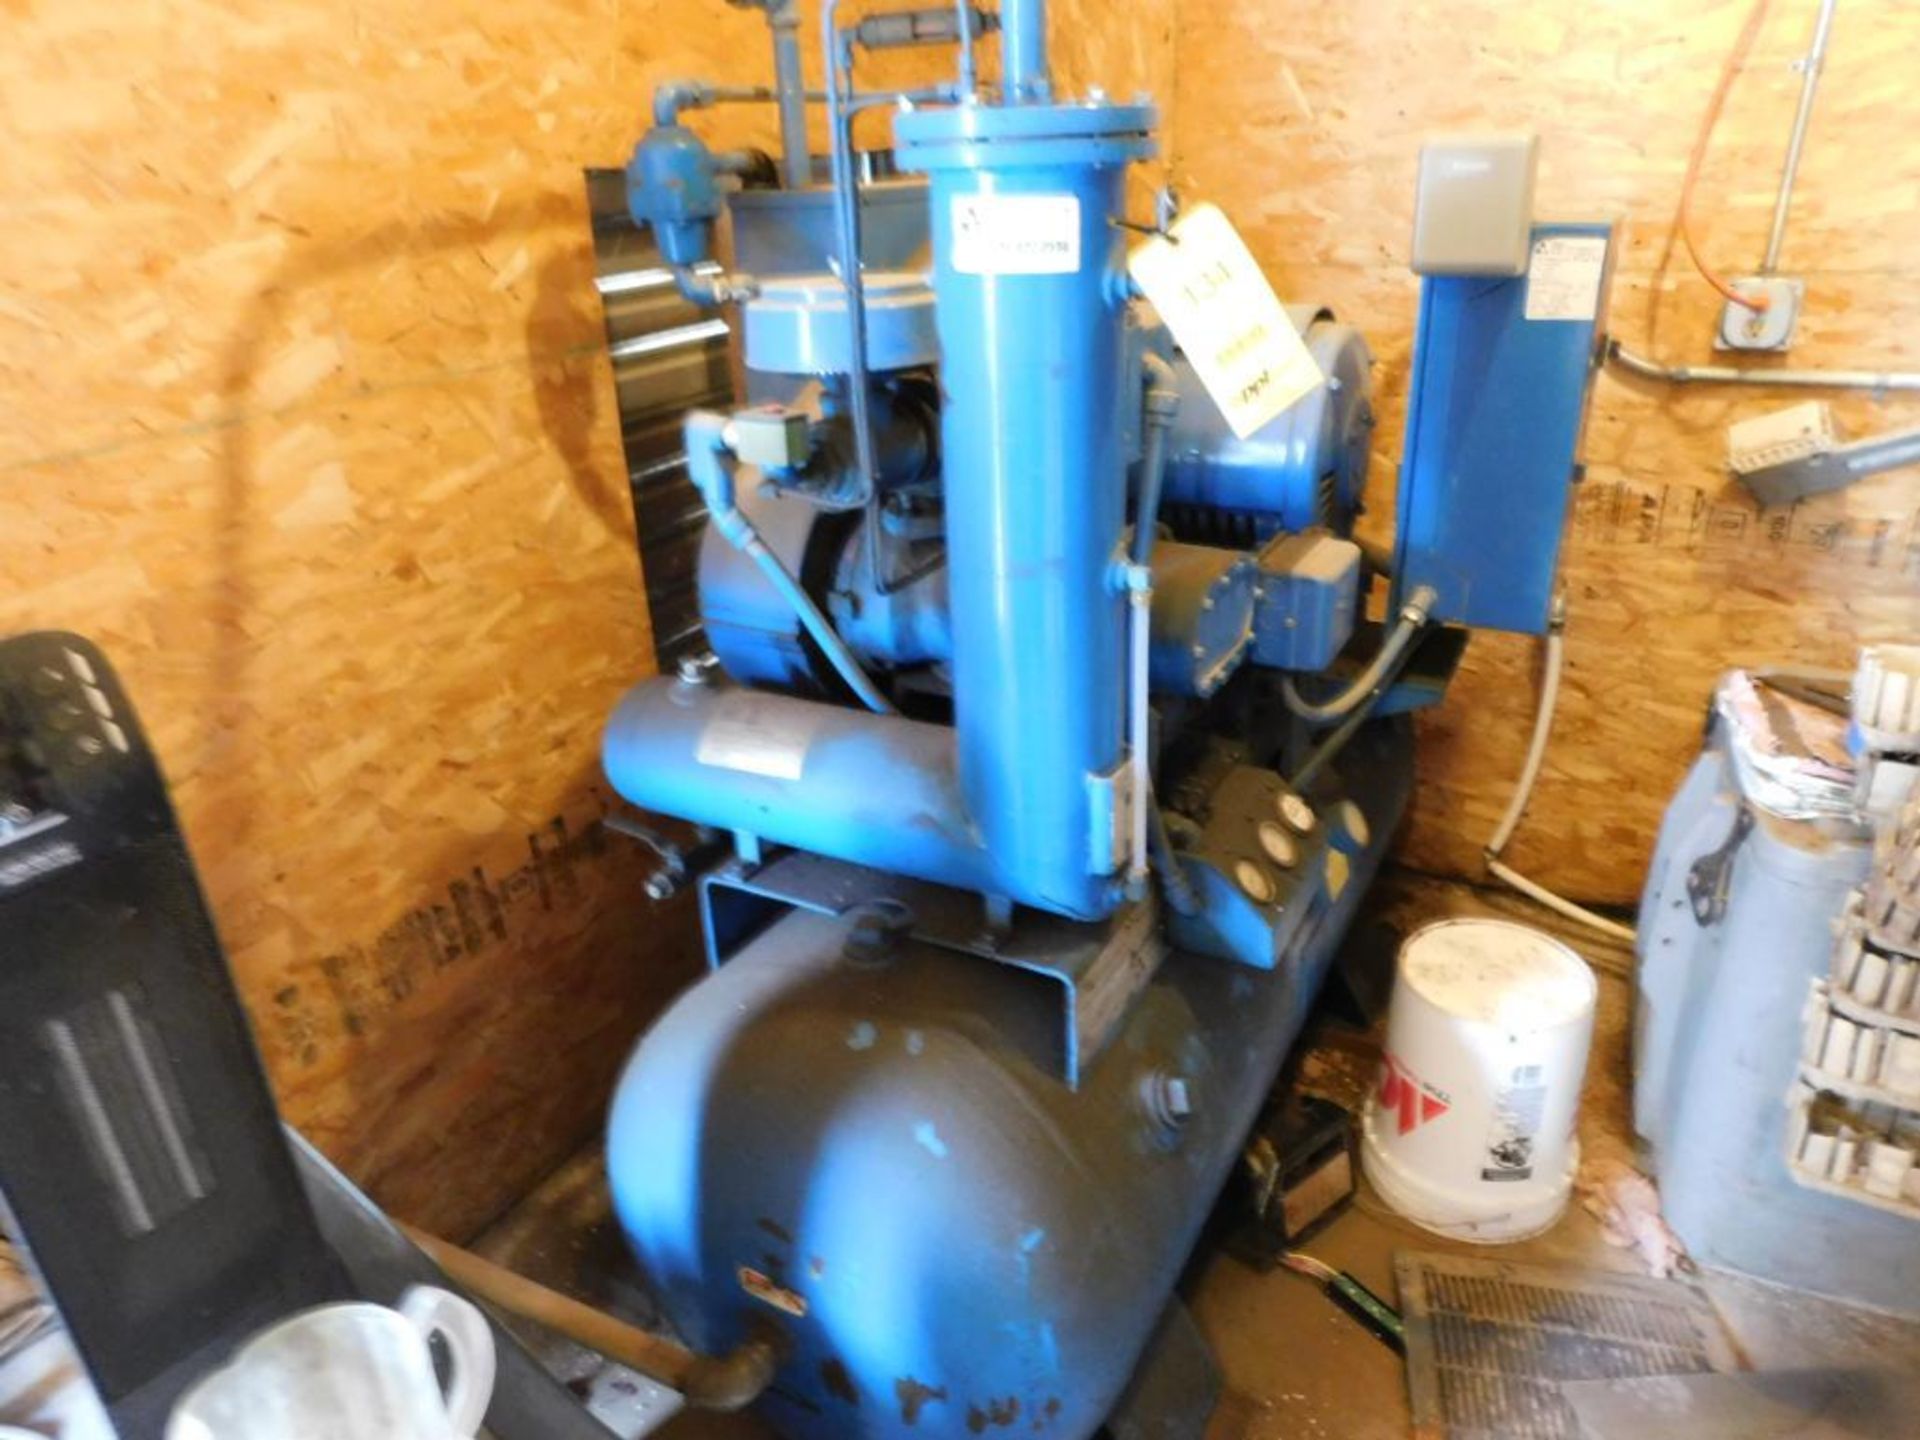 Quincy L-25-F 25 HP Horizontal Tank Mounted Rotary Compressor, S/N 900656 w/Zeks Air Dryer (CENTRAL - Image 2 of 5